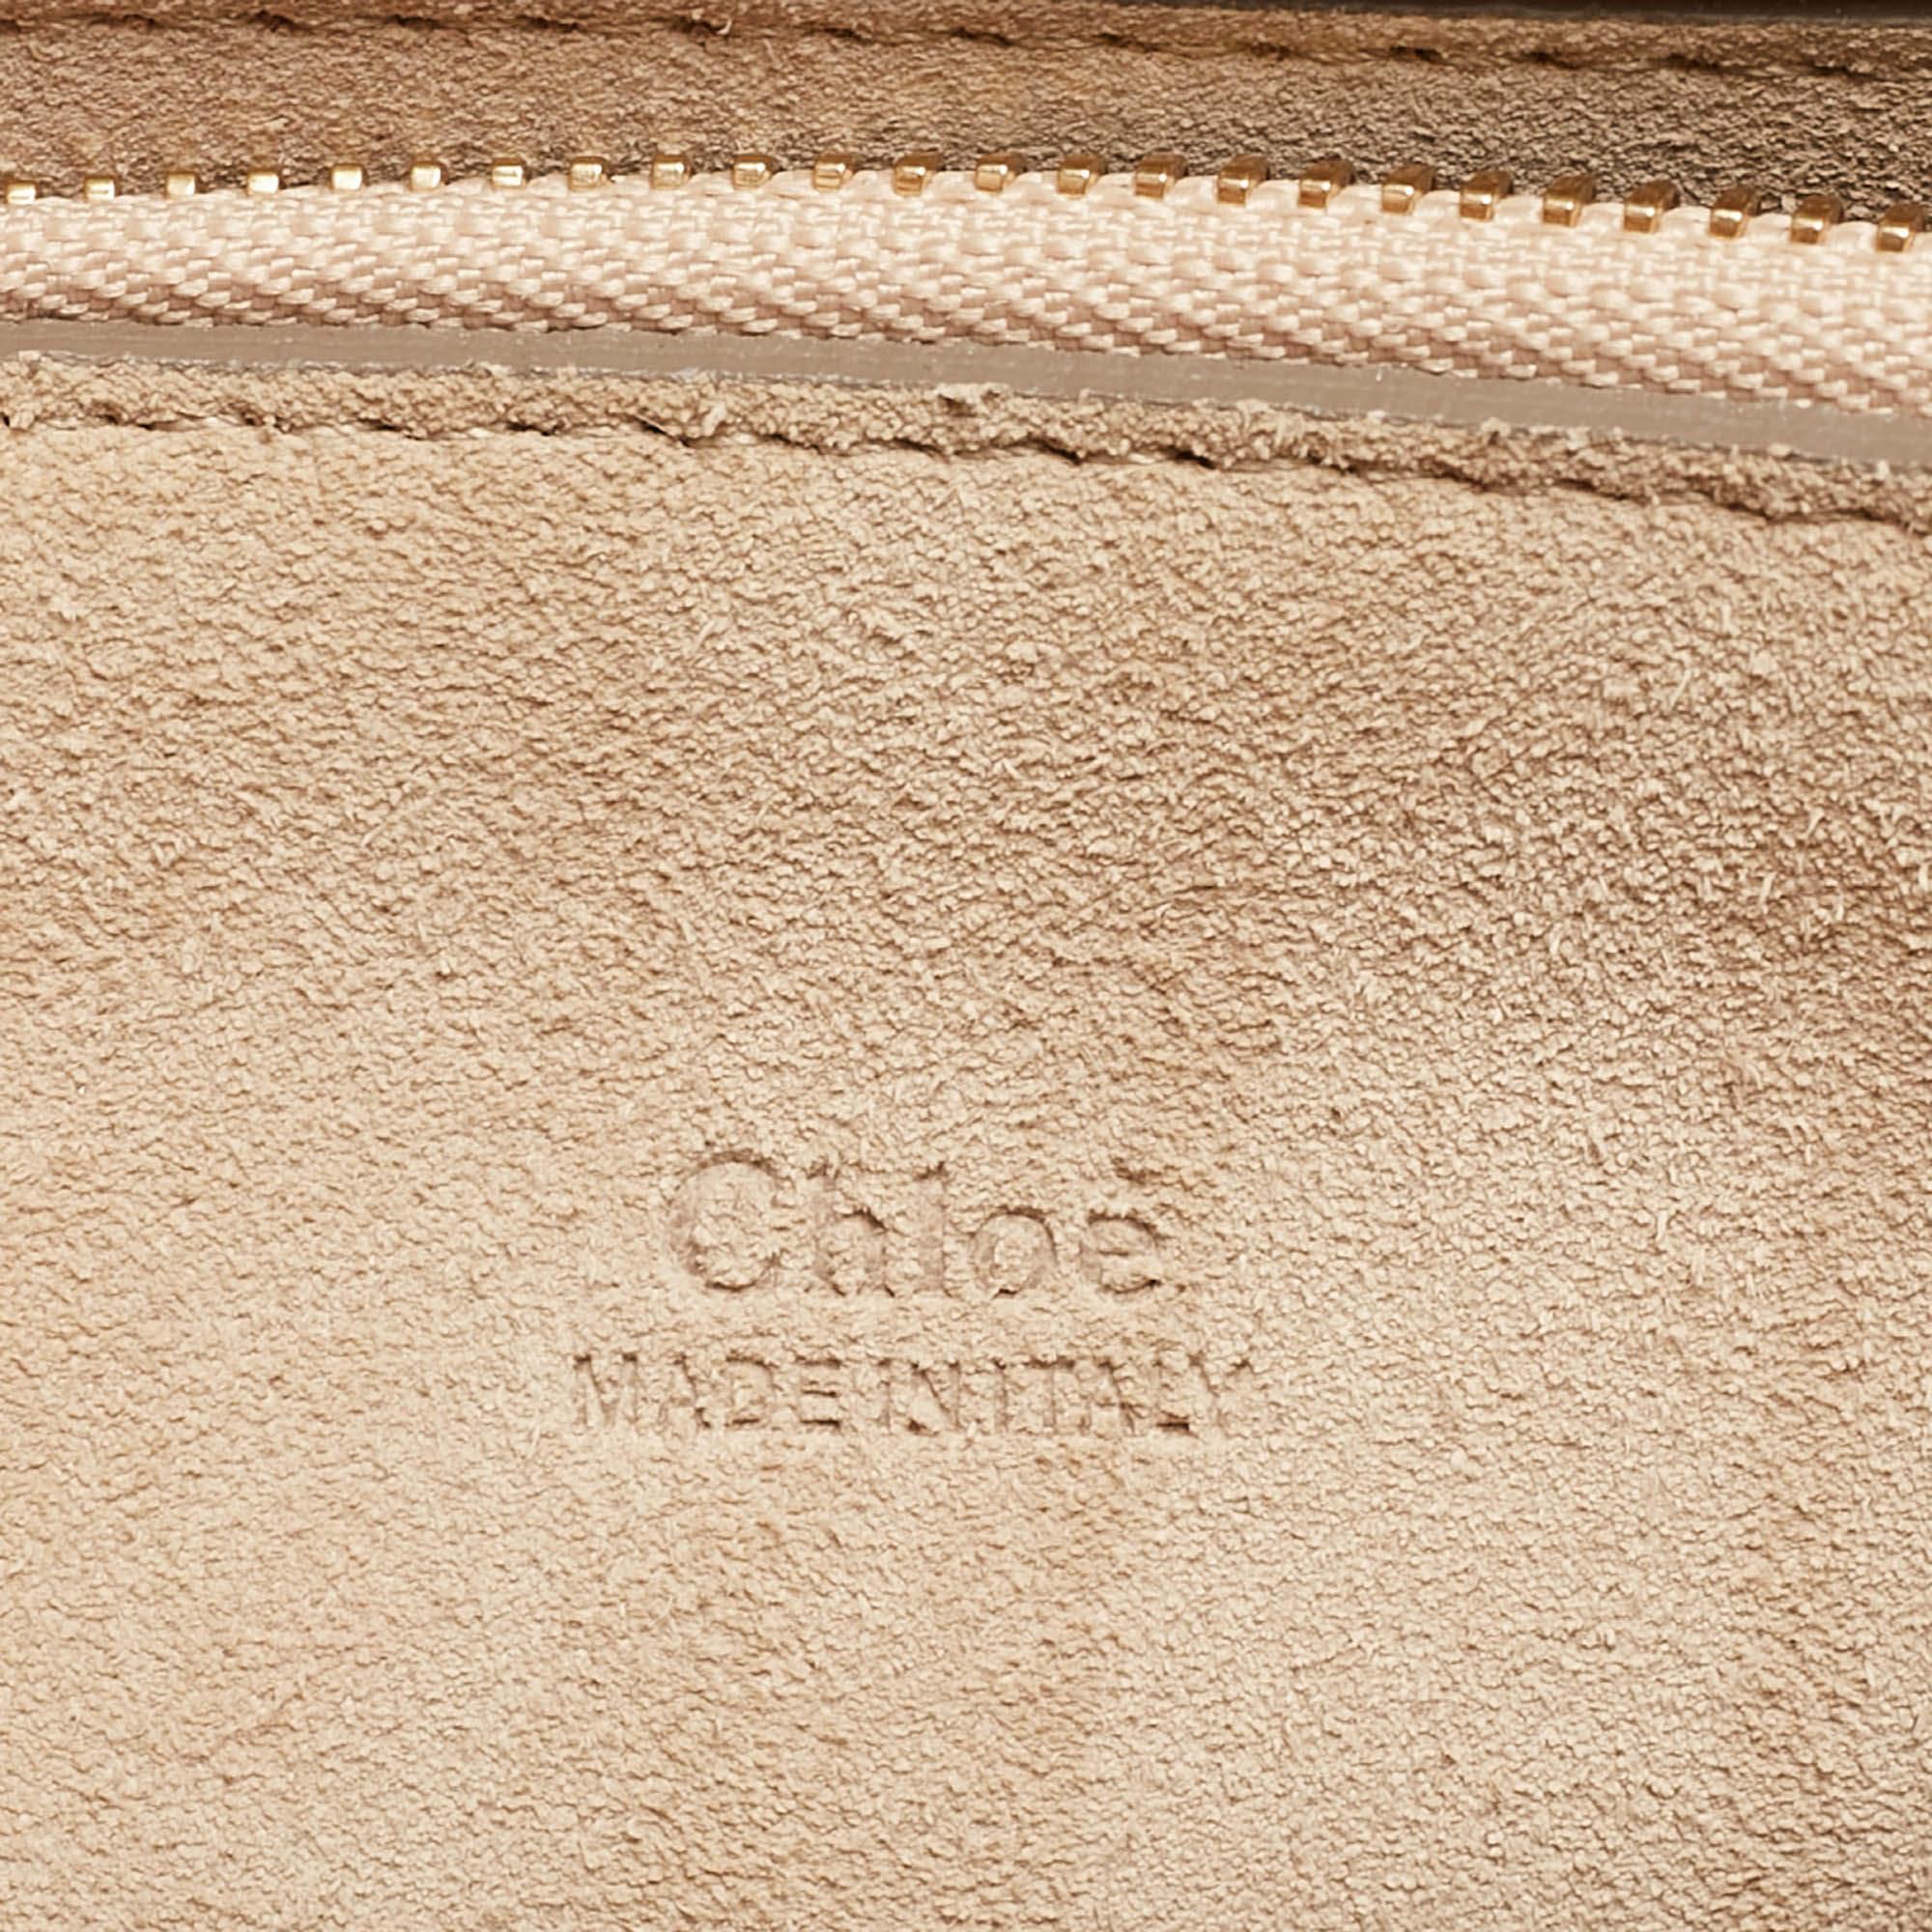 Chloe Brown Leather and Suede Medium Faye Shoulder Bag For Sale 9